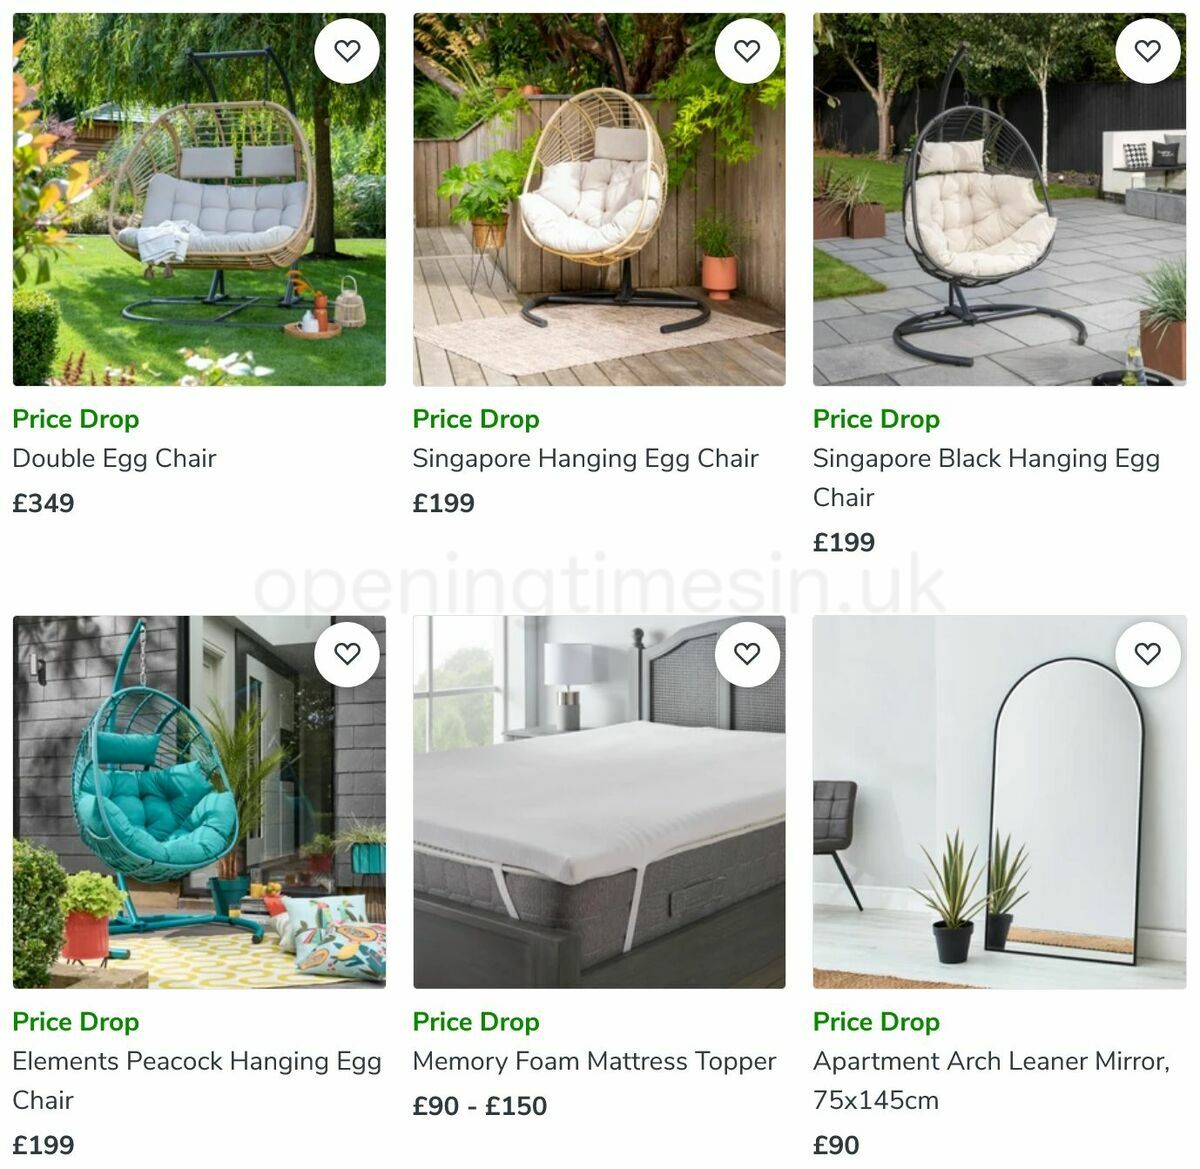 Dunelm Offers from 19 May